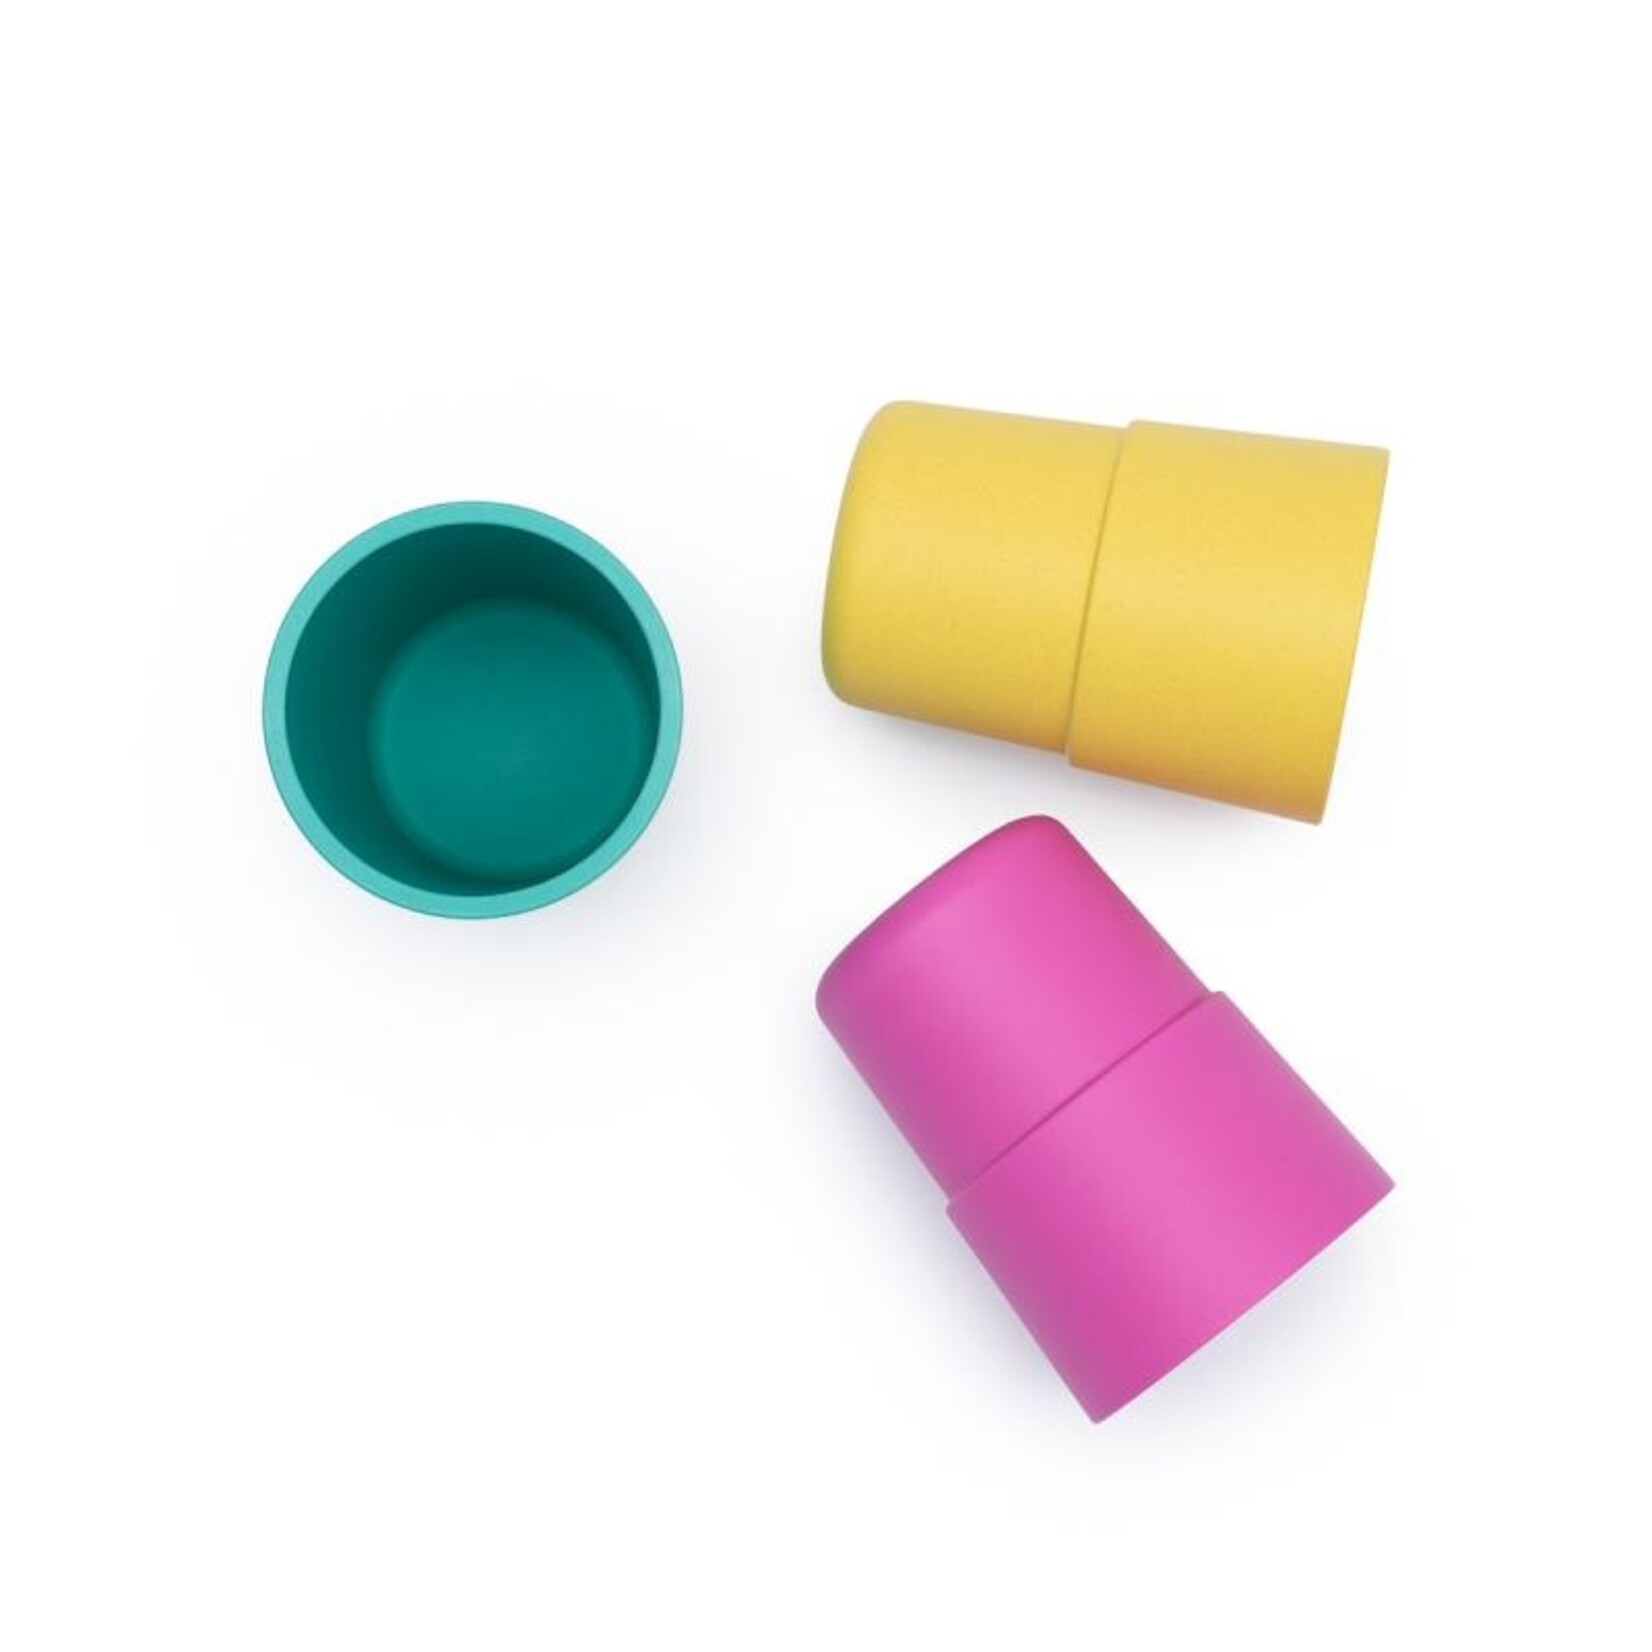 bobo & boo bamboo 3 pack of cups